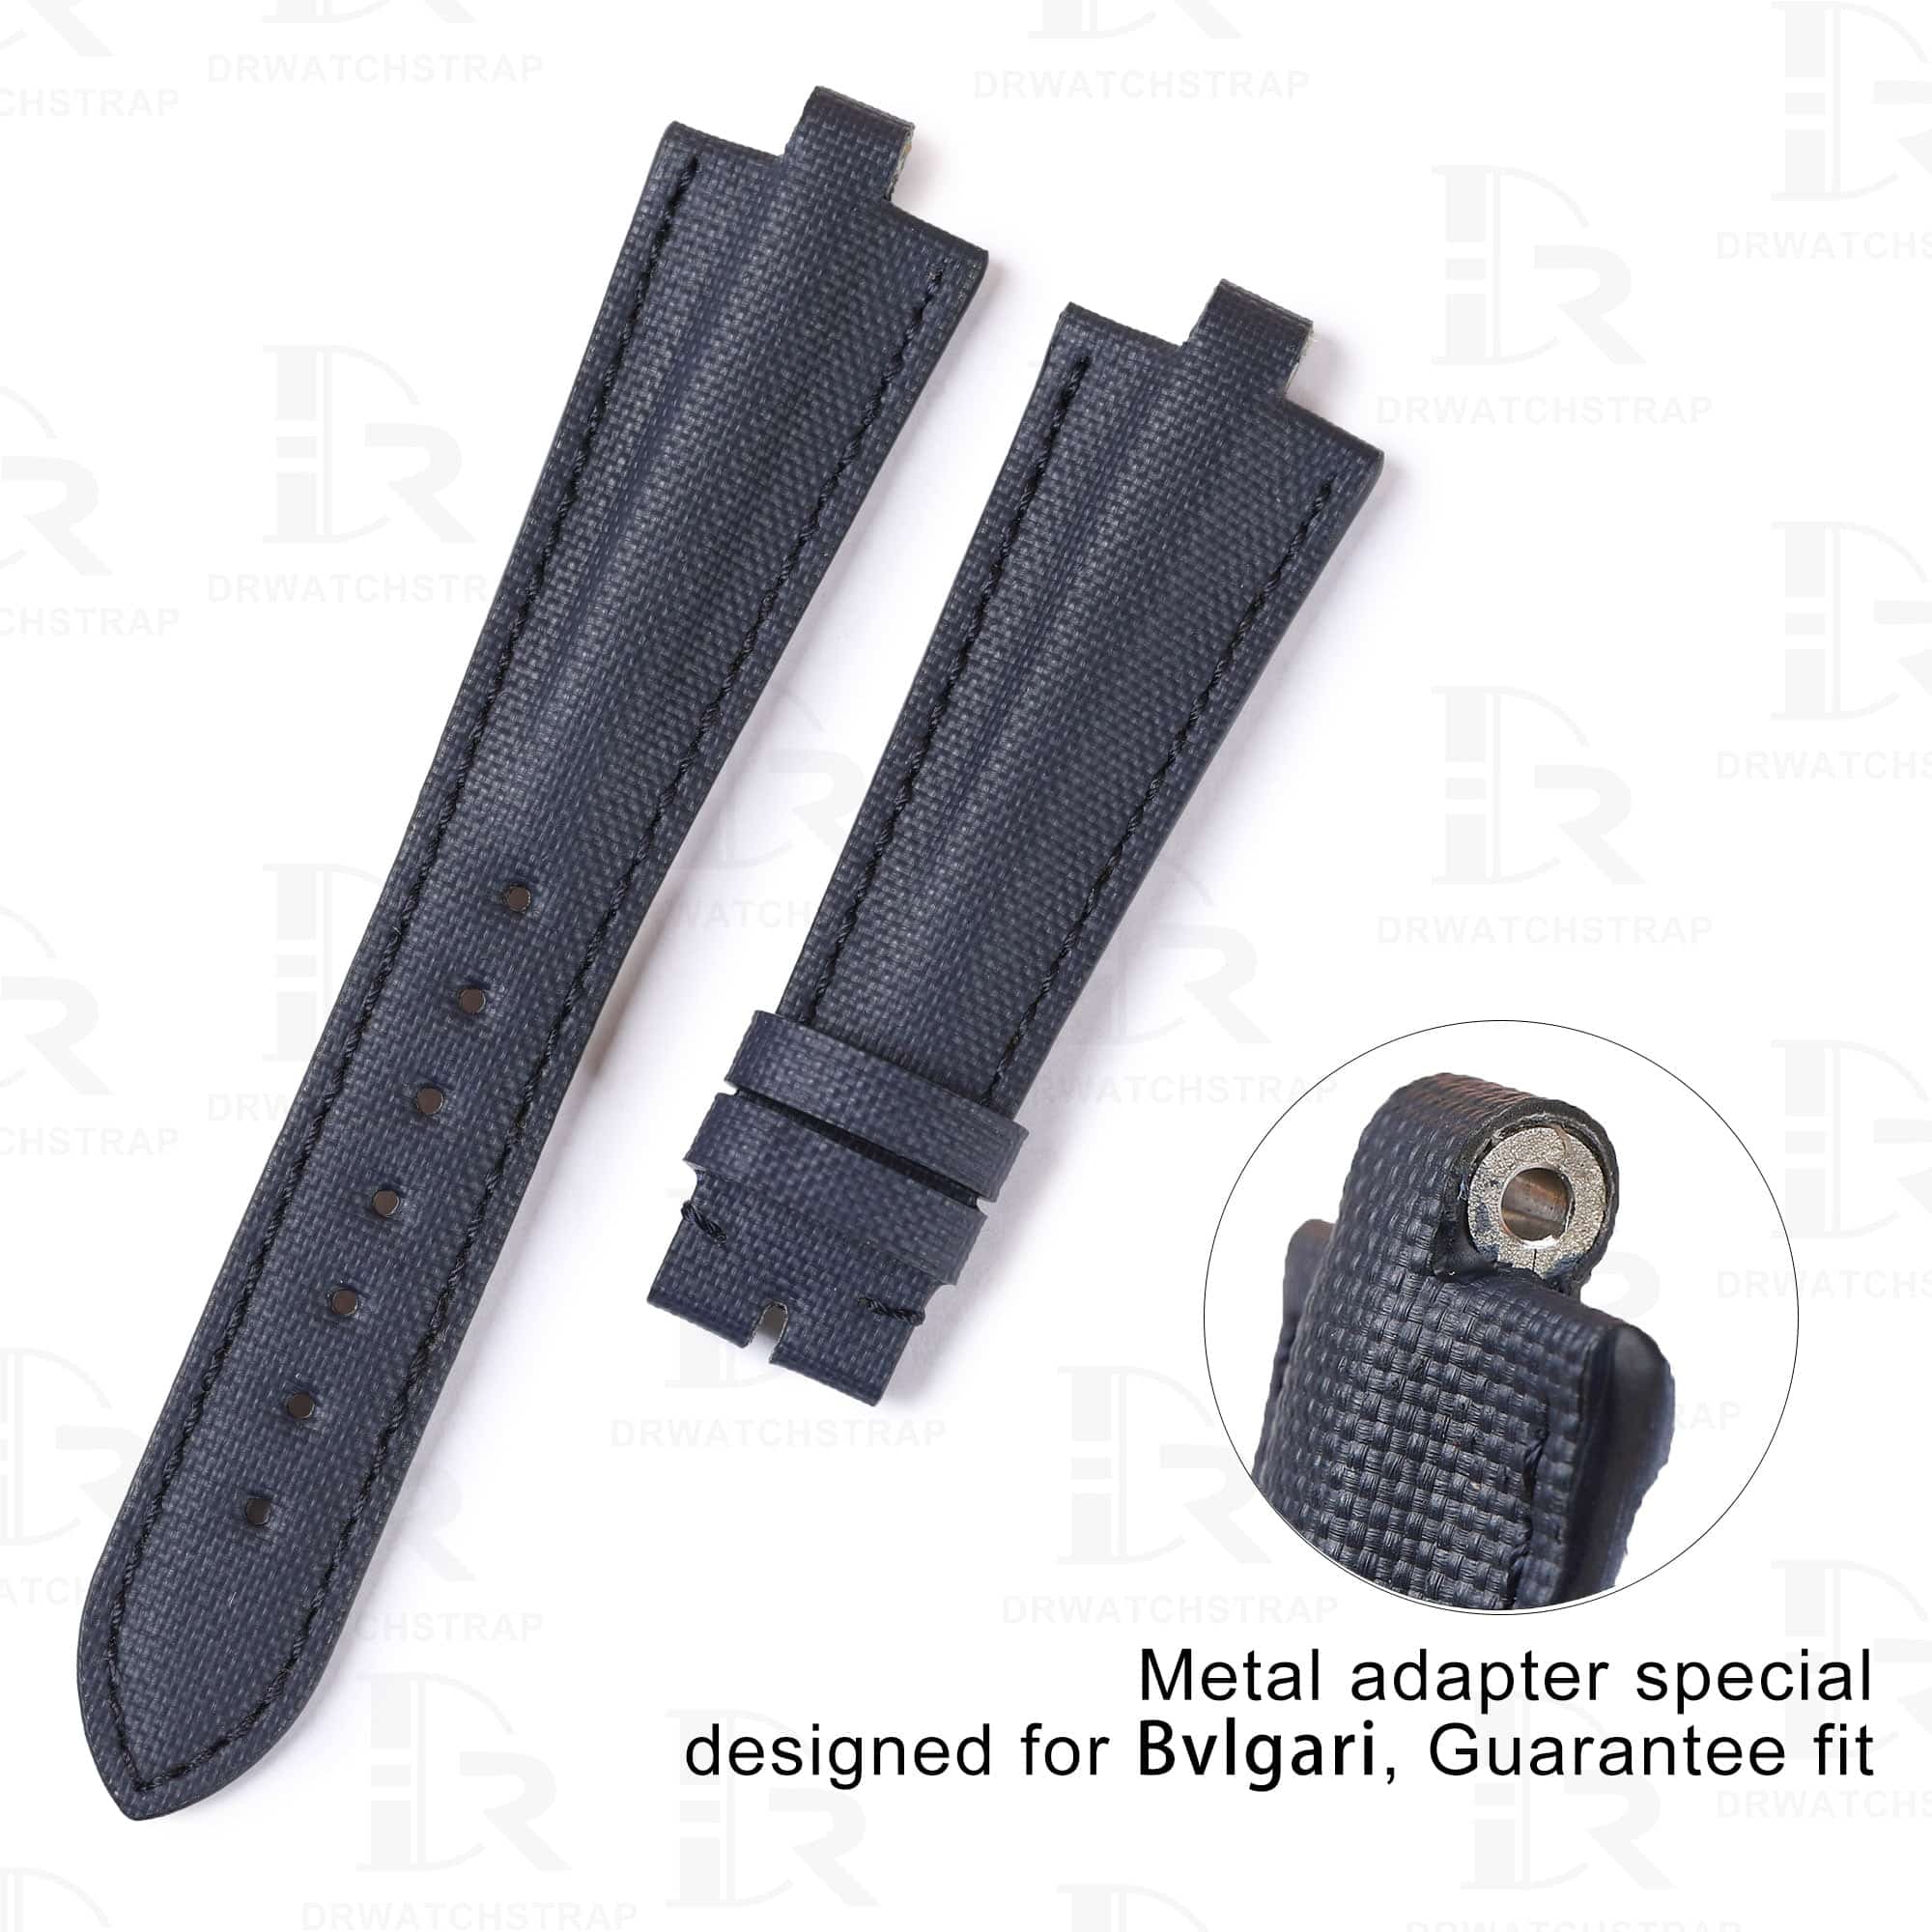 Mental adapter special design for Bvlgari Diagono watches with nylon canvas material